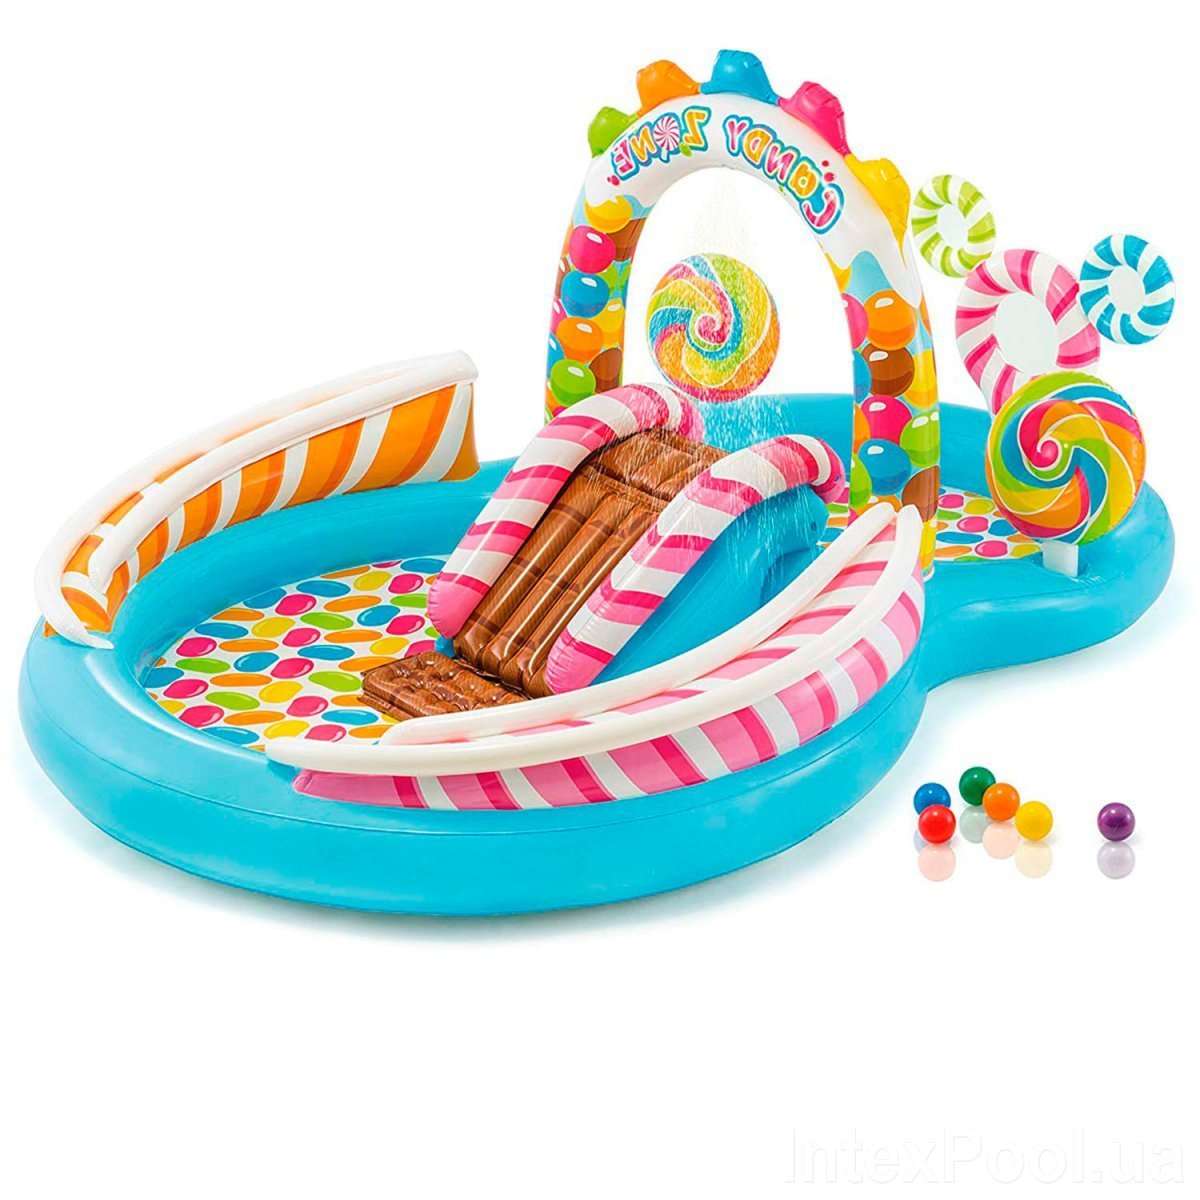 Intex Candy Zone Play Center Inflatable Pool